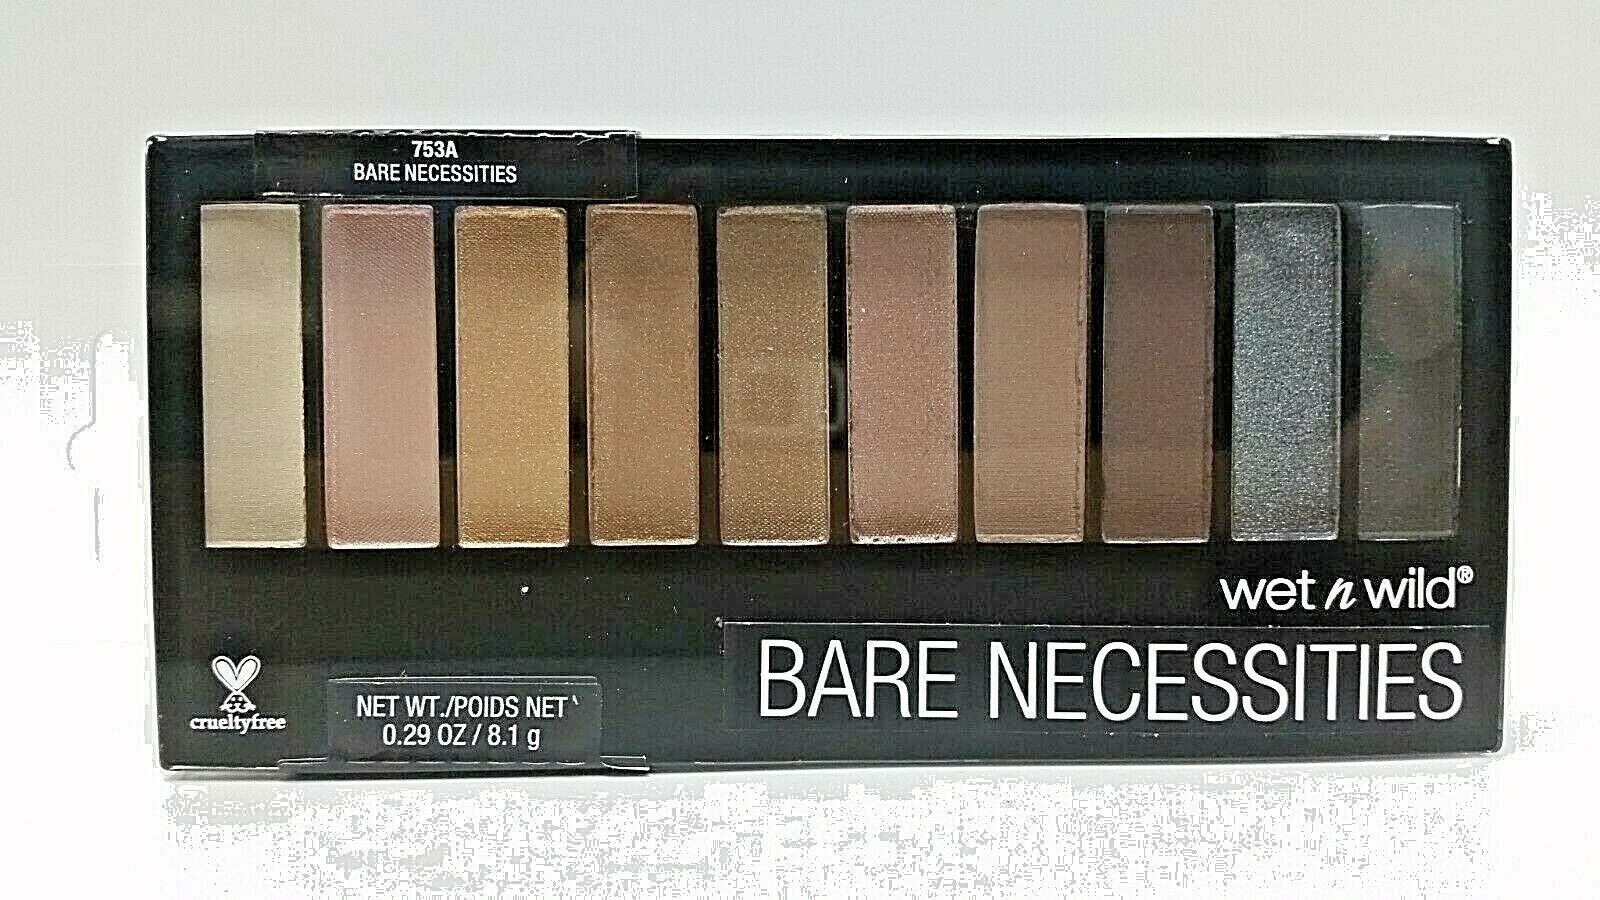 Wet & Wild Color Icon AU NATUREL 10-Pan Eyeshadow 753A Bare Necessities SEALED - $9.89